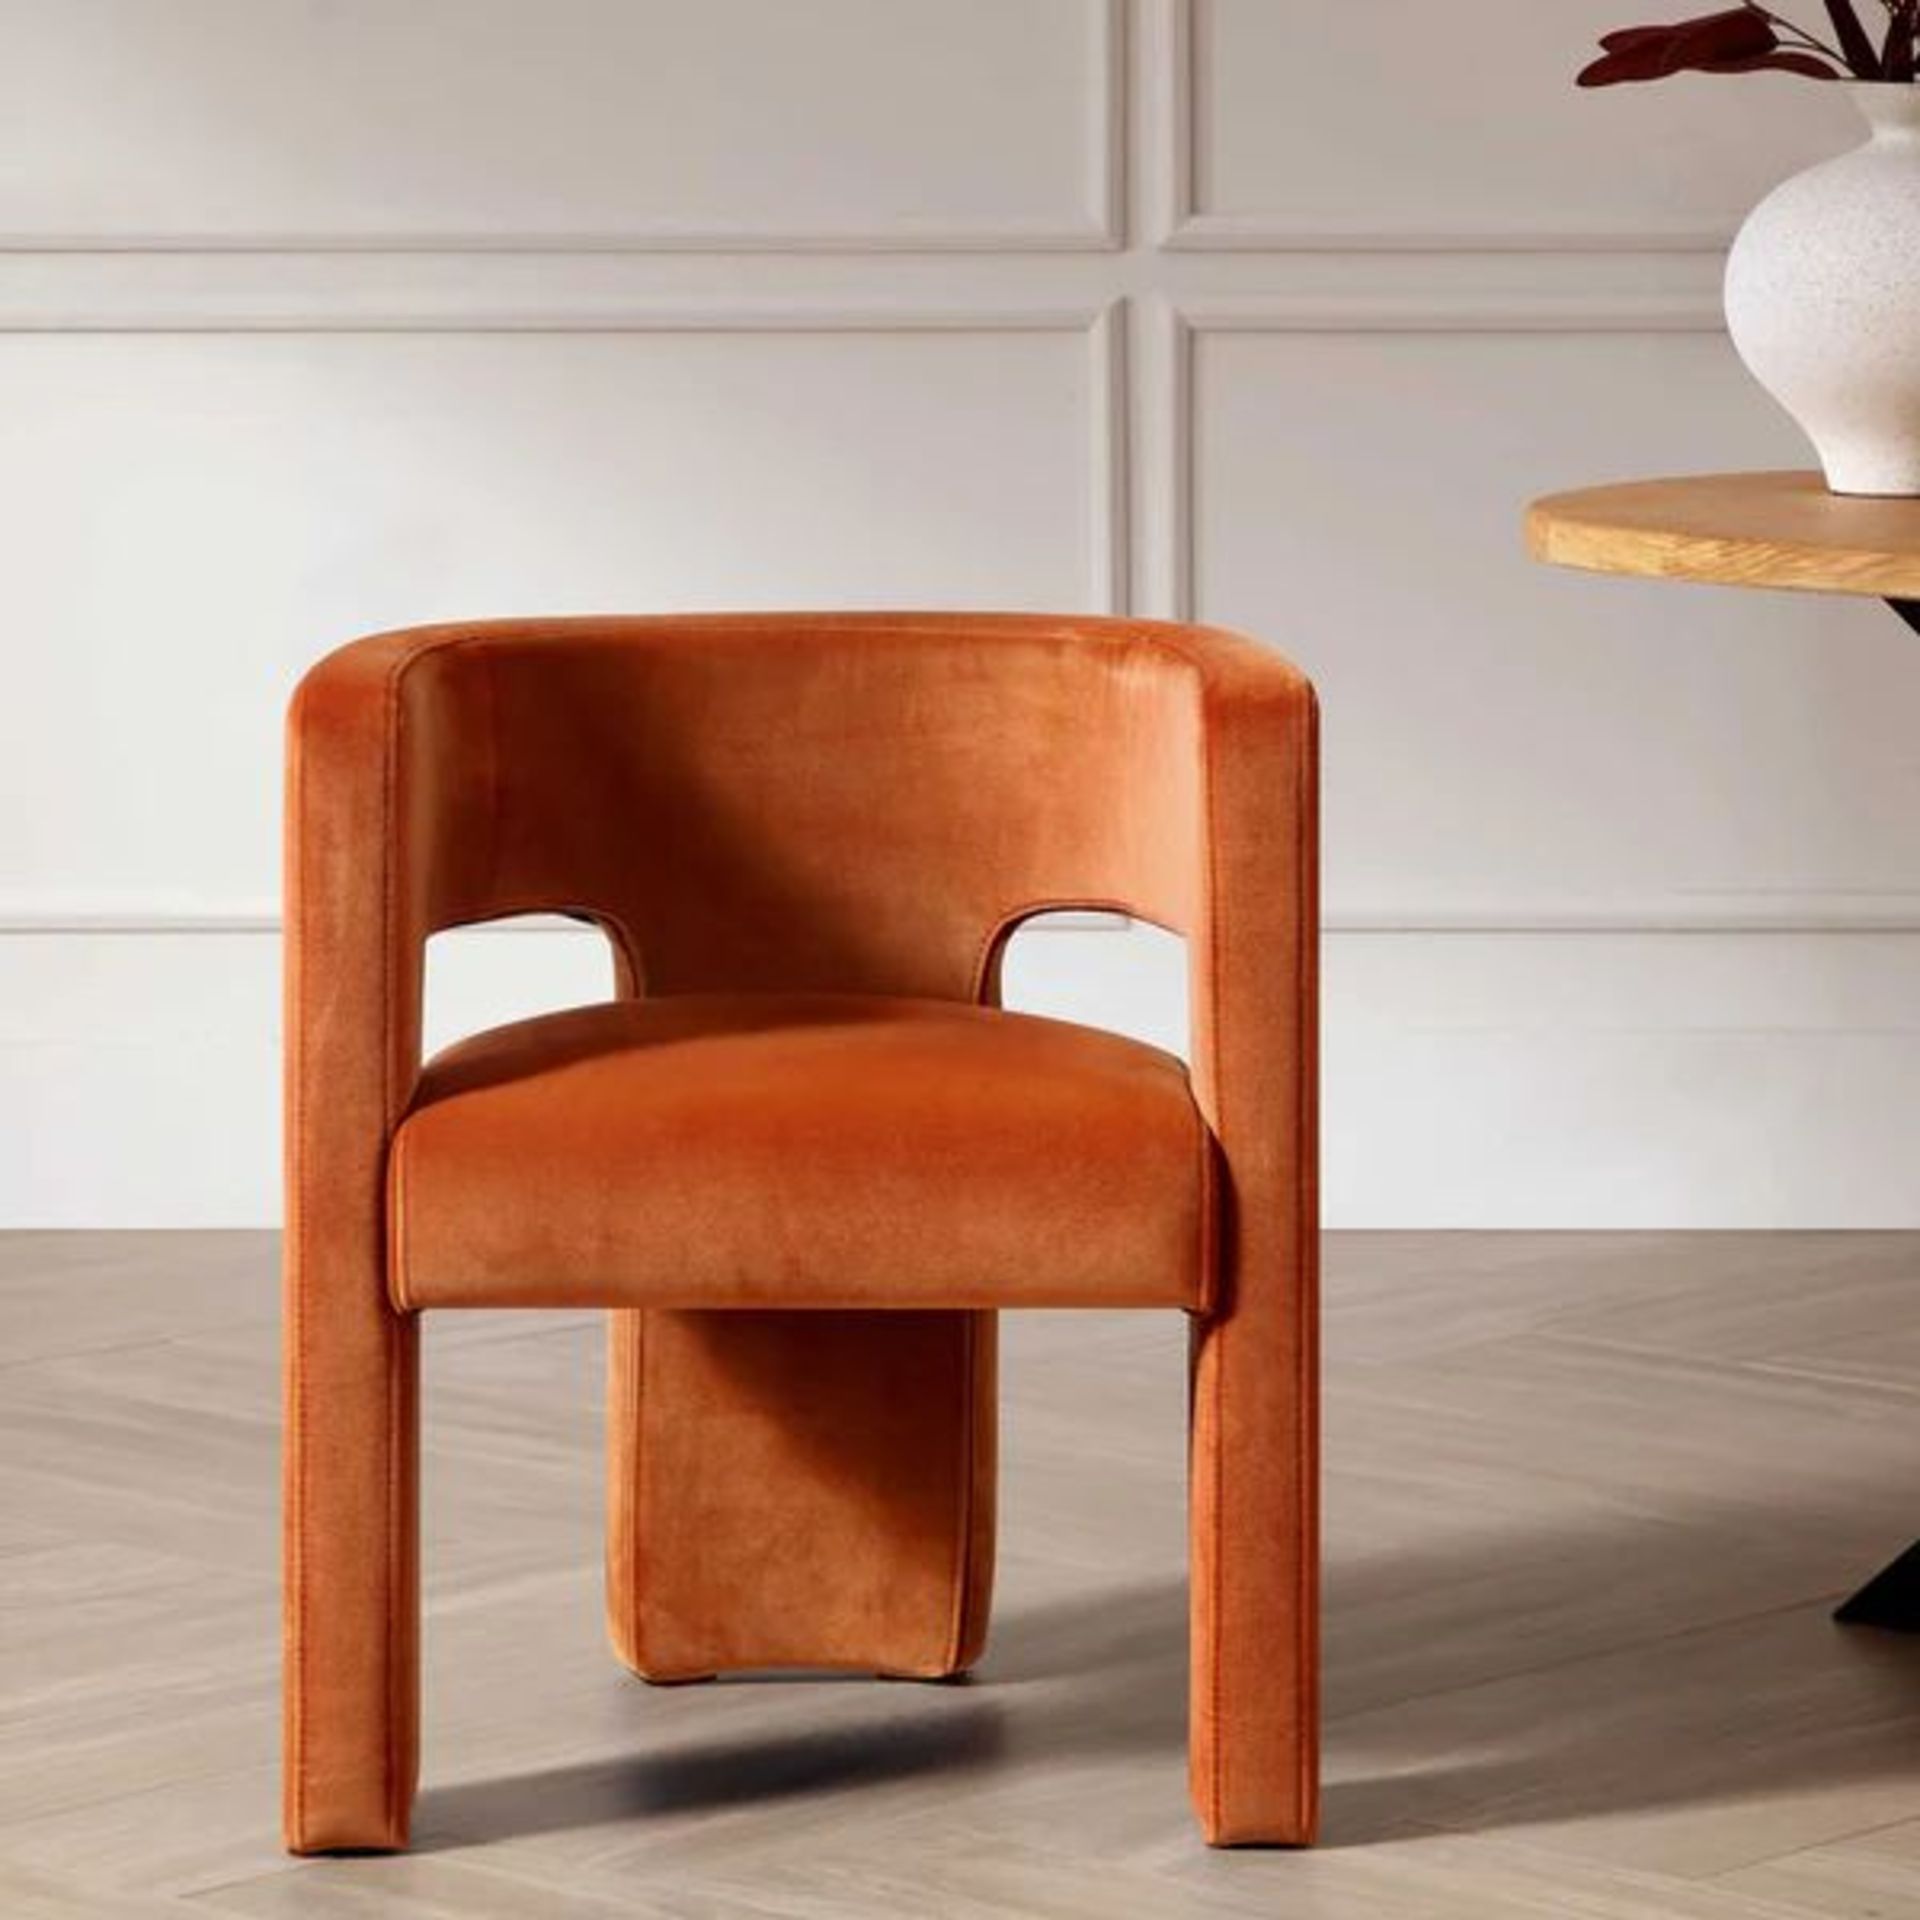 Greenwich Rust Velvet Dining Chair. - R19.4. RRP £255.99. Our beautiful Greenwich chair features